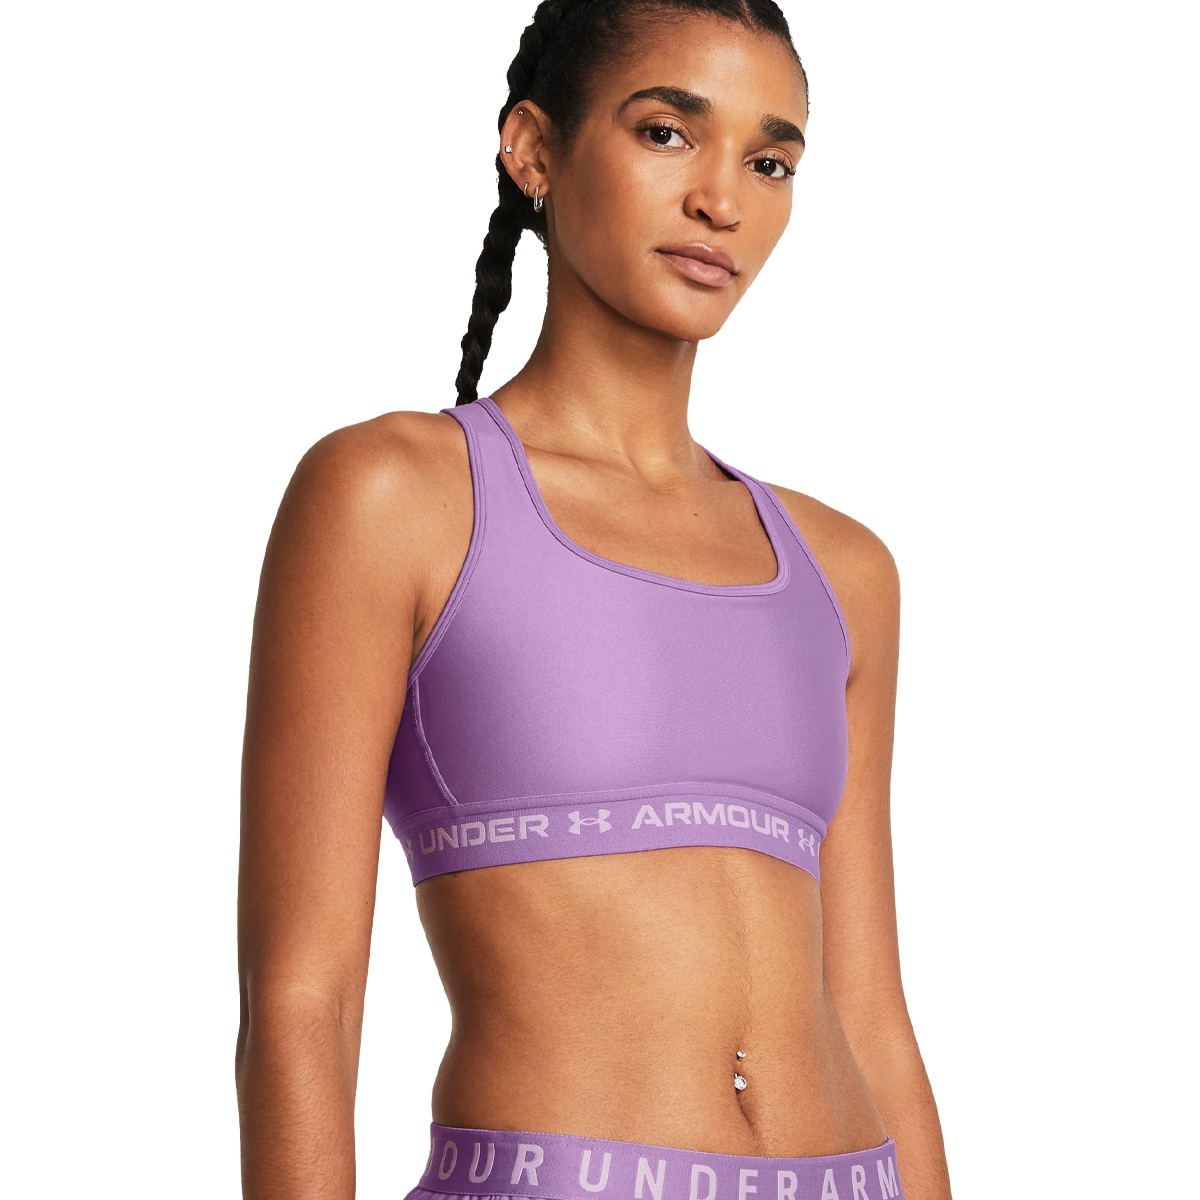 Under Armour Low Crossback Sports Bra for Ladies - Black - L